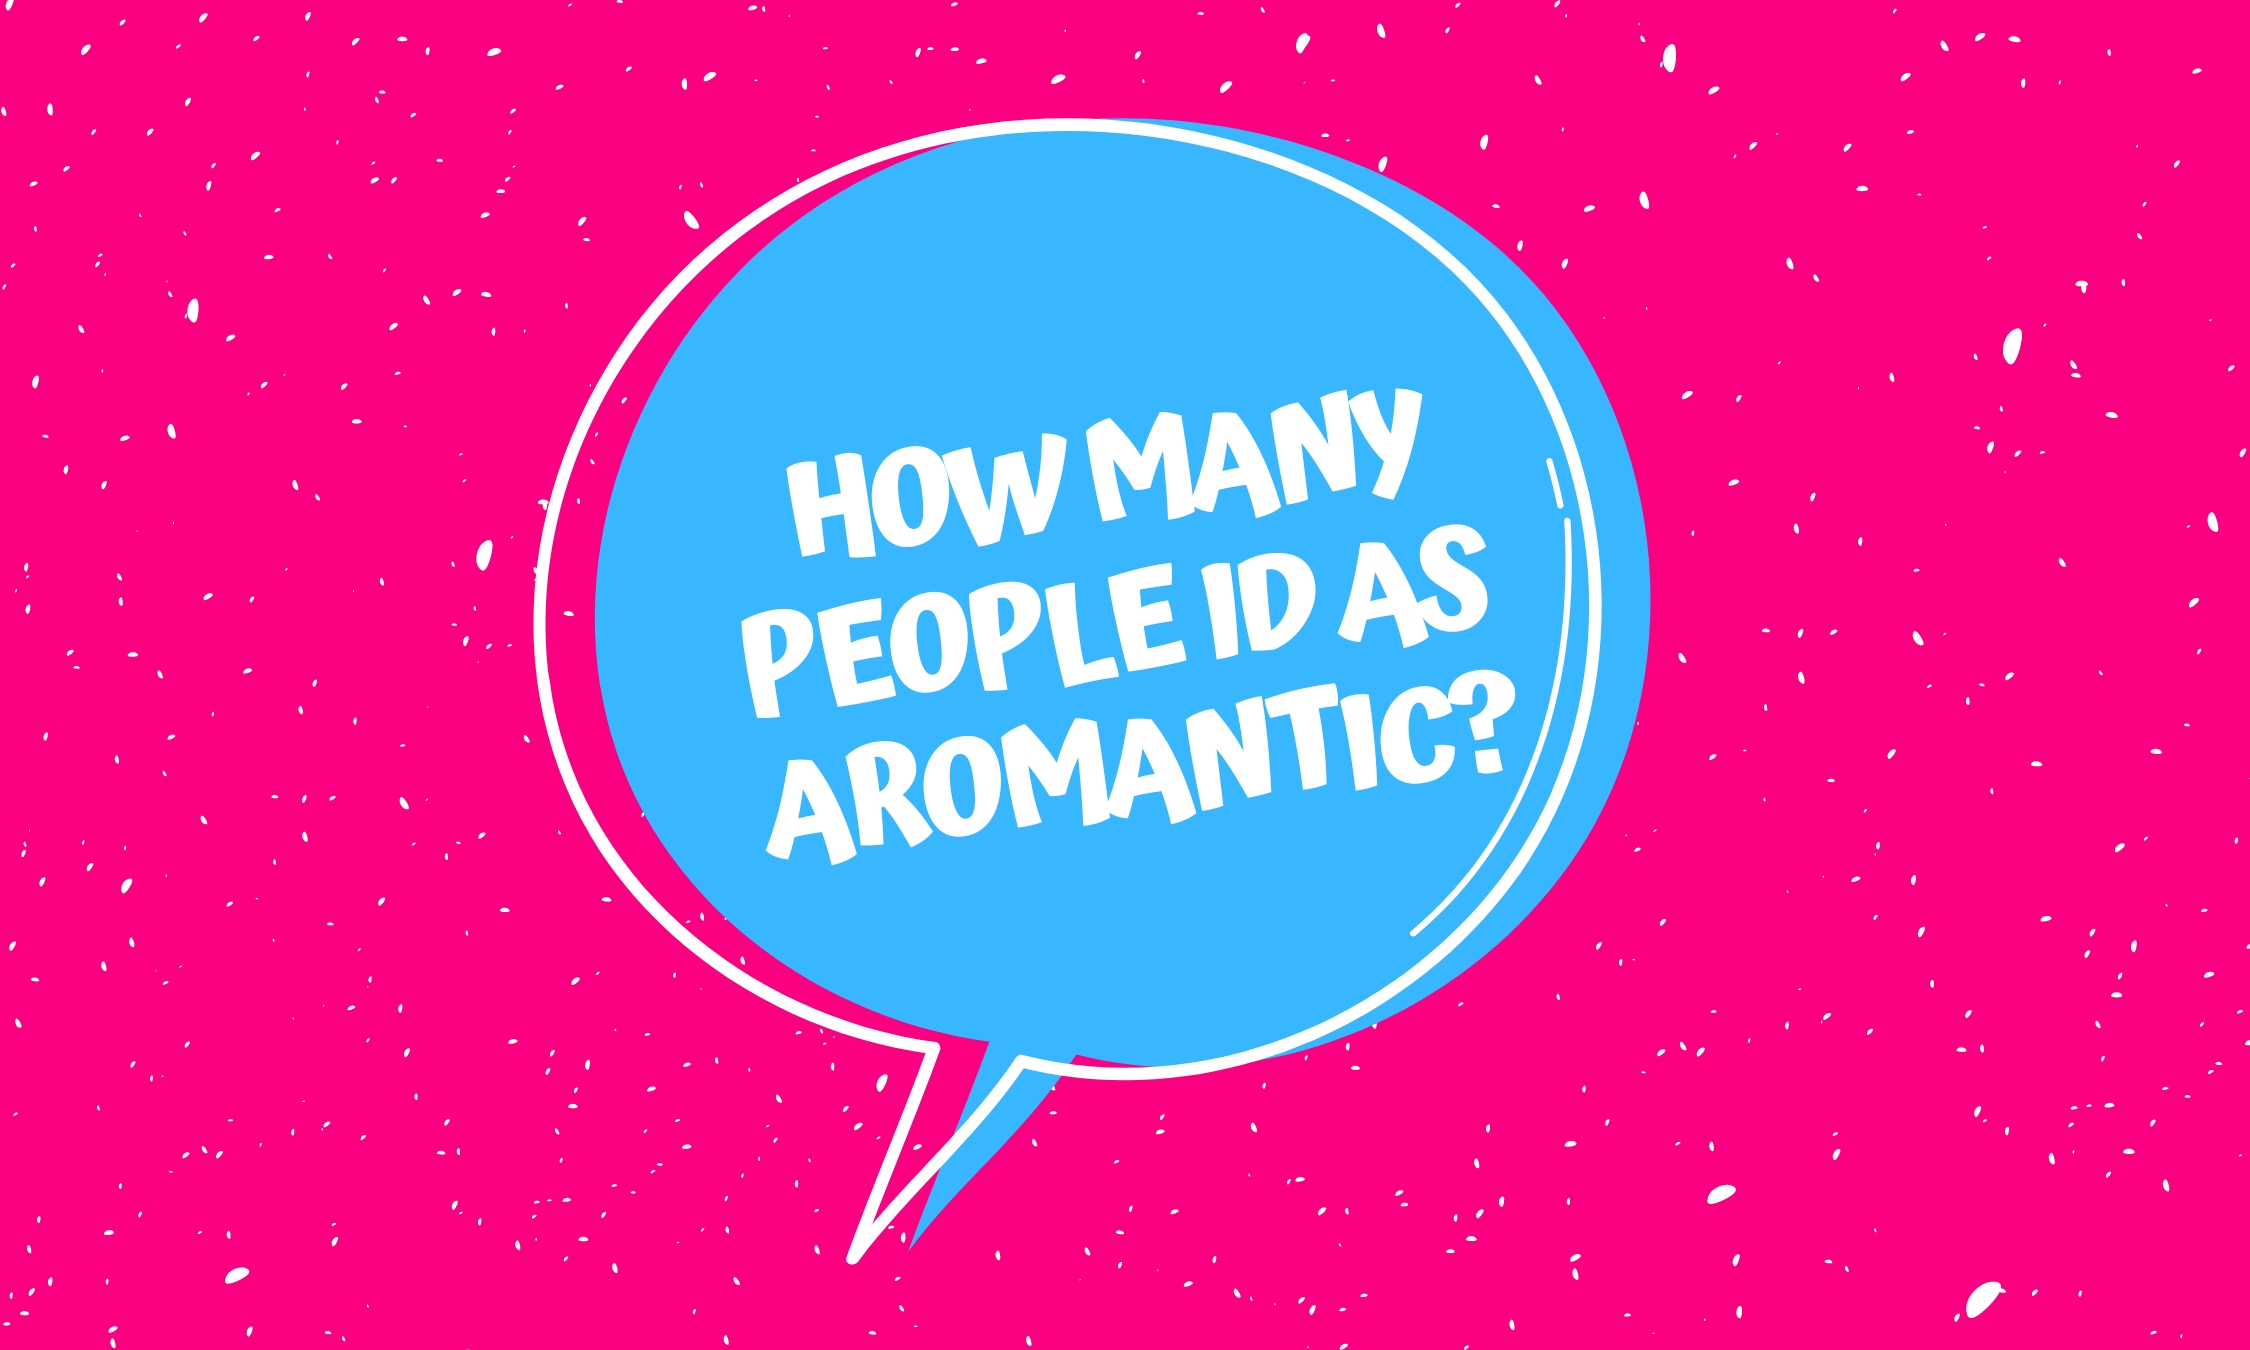 How many people identify as Aromantic?